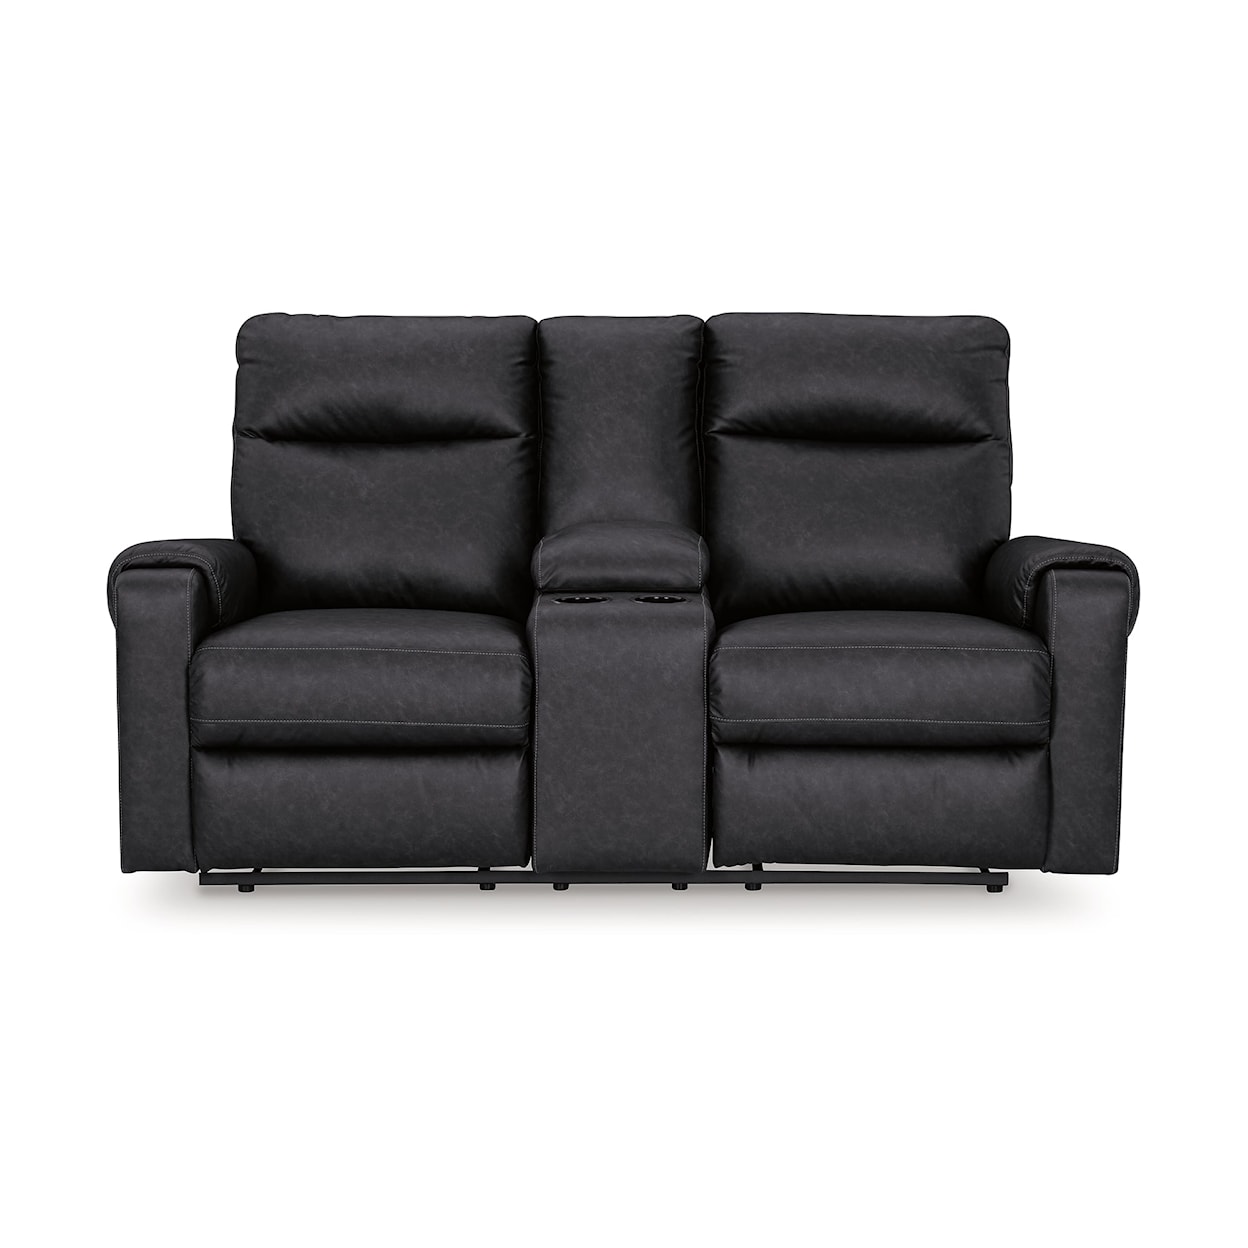 Signature Design by Ashley Axtellton Power Reclining Loveseat with Console